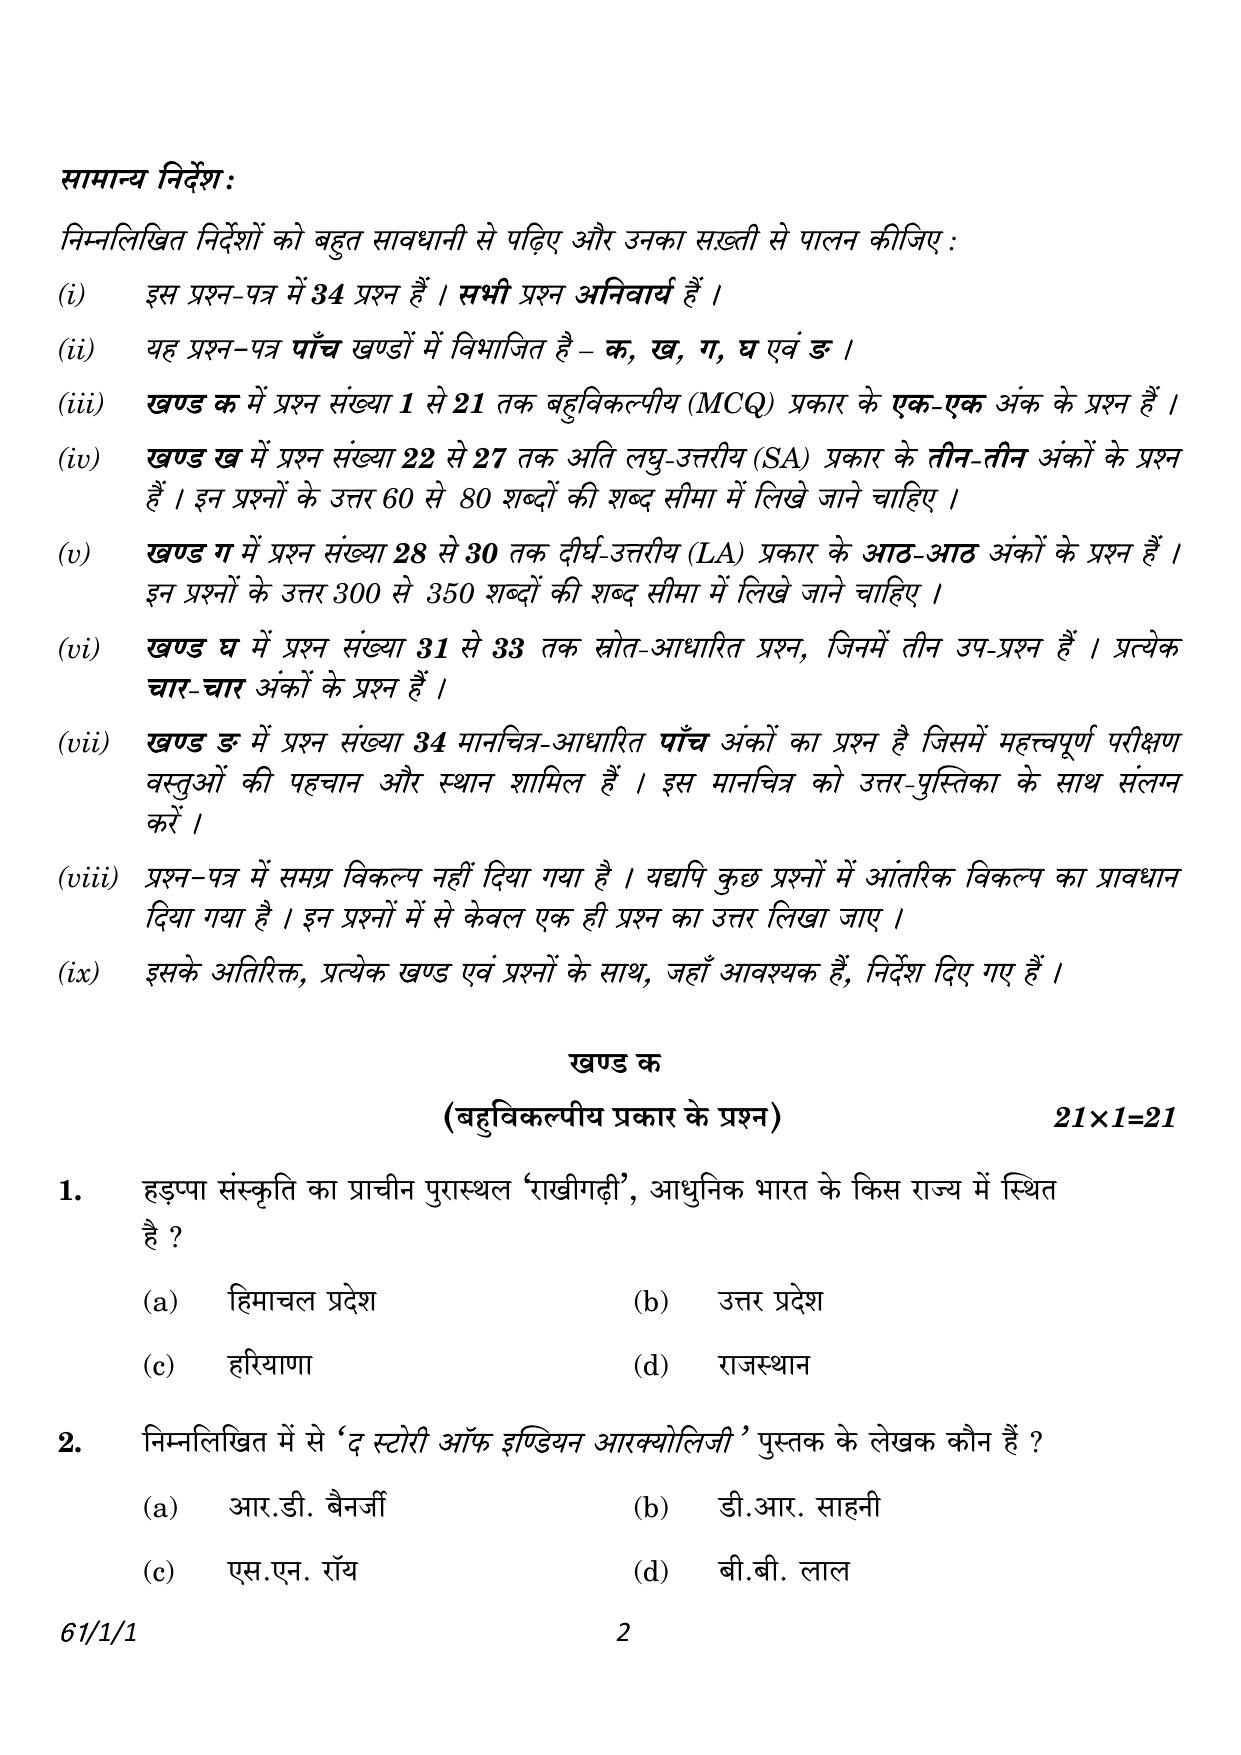 CBSE Class 12 61-1-1 History 2023 Question Paper - Page 2